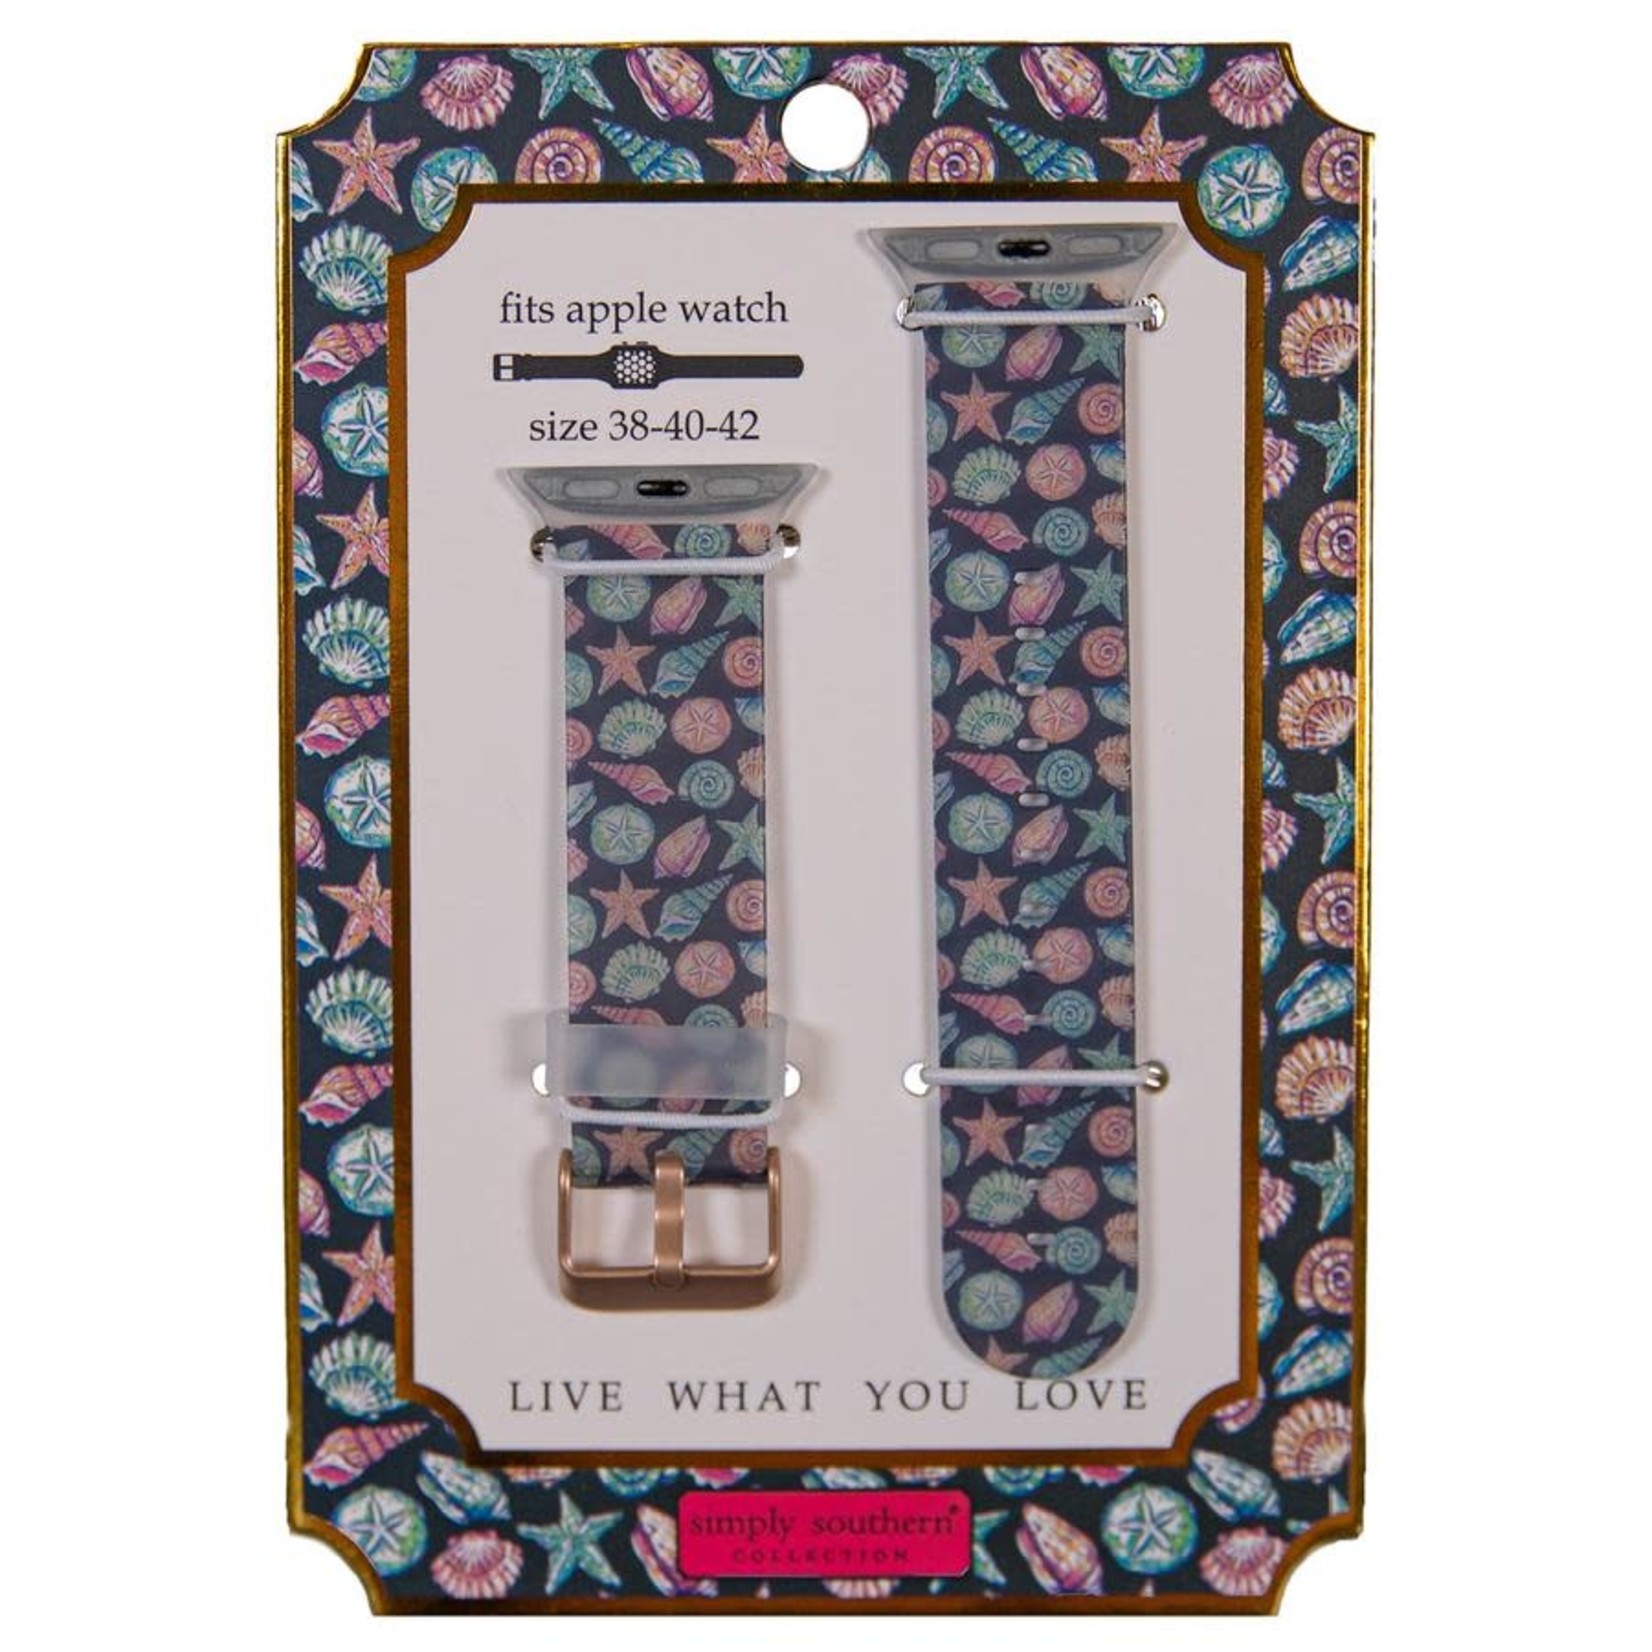 Simply Southern Apple Watch Bands